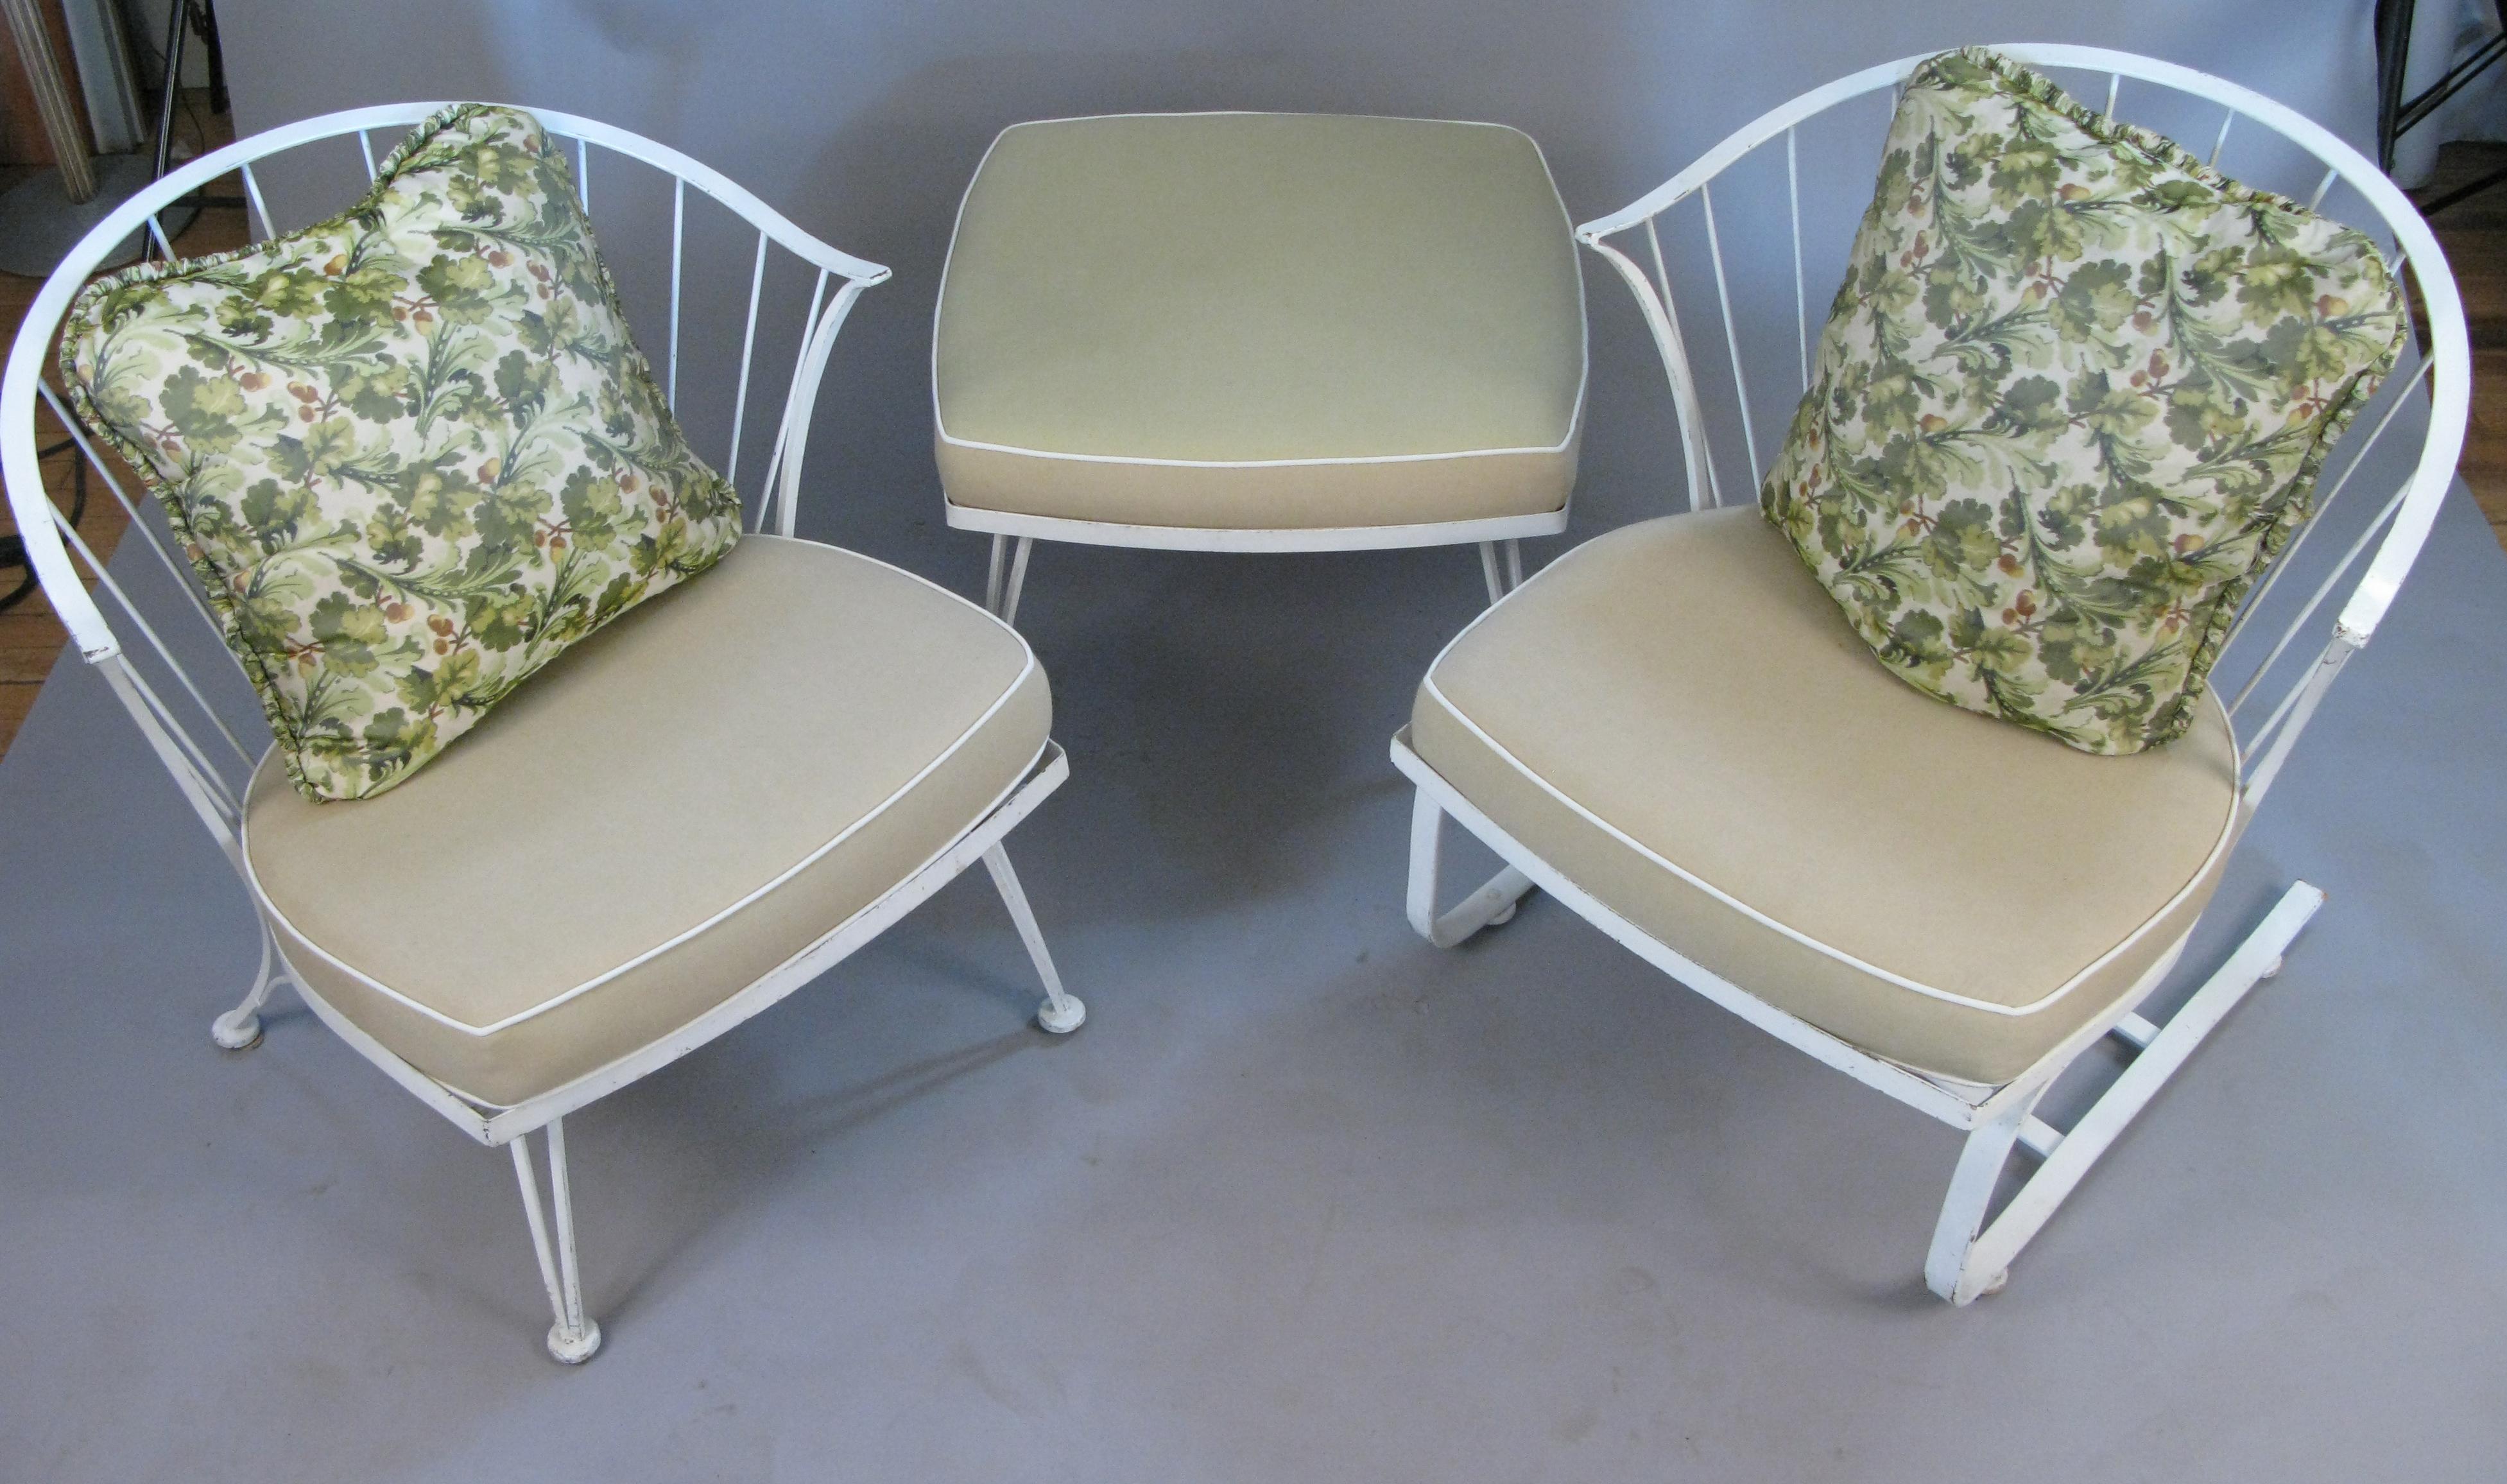 A very nice set of vintage lounge seating from Woodard's Pinecrest collection, circa 1960. set includes a large lounge chair, and a matching large lounge chair on a spring base, along with the matching ottoman. in their original white finish, which